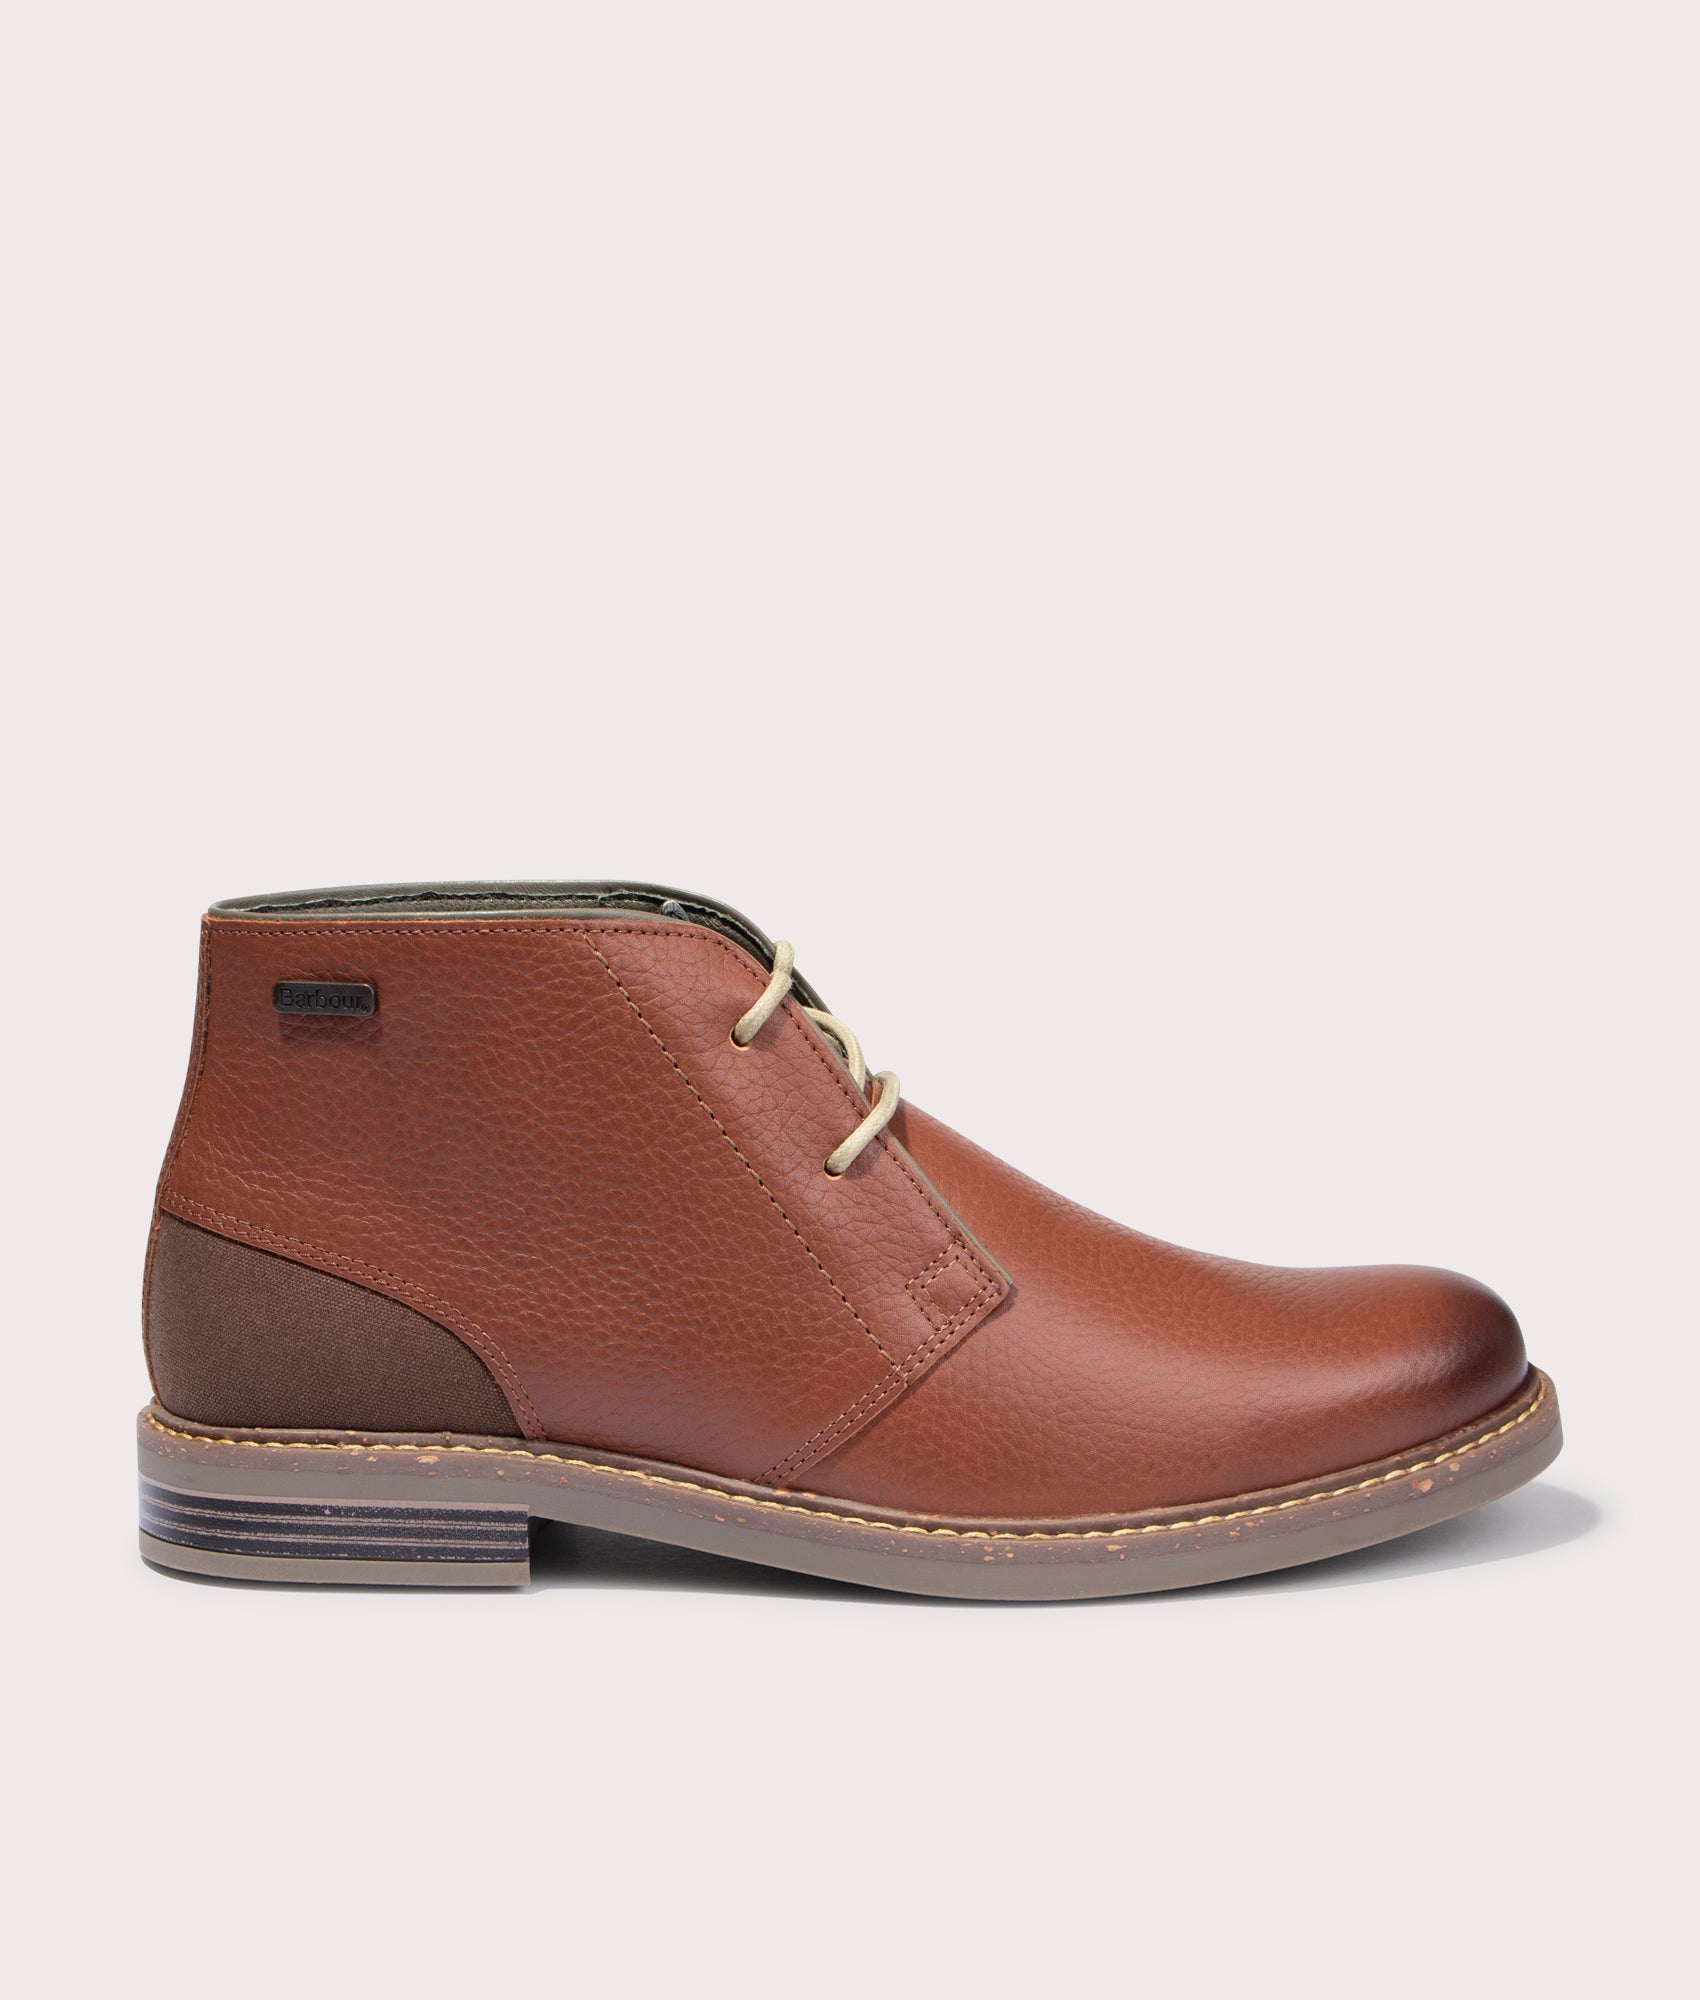 Barbour Lifestyle Mens Readhead Chukka Boots - Colour: TA52 Fawn Suede - Size: 9